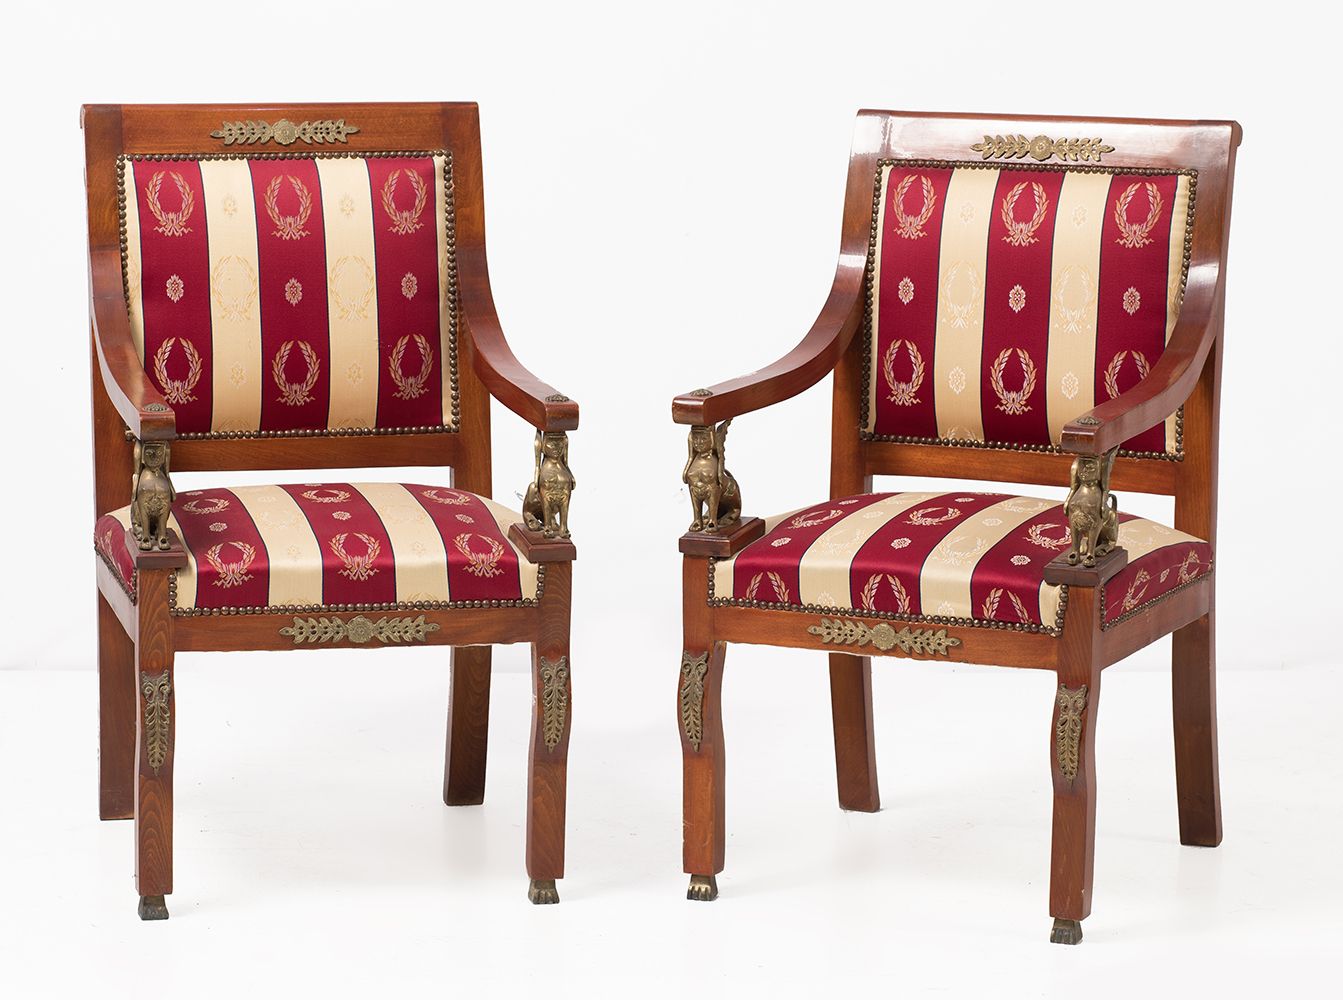 Pair of Empire armchairs Pair of Empire style armchairs. Wood simulating mahogan&hellip;